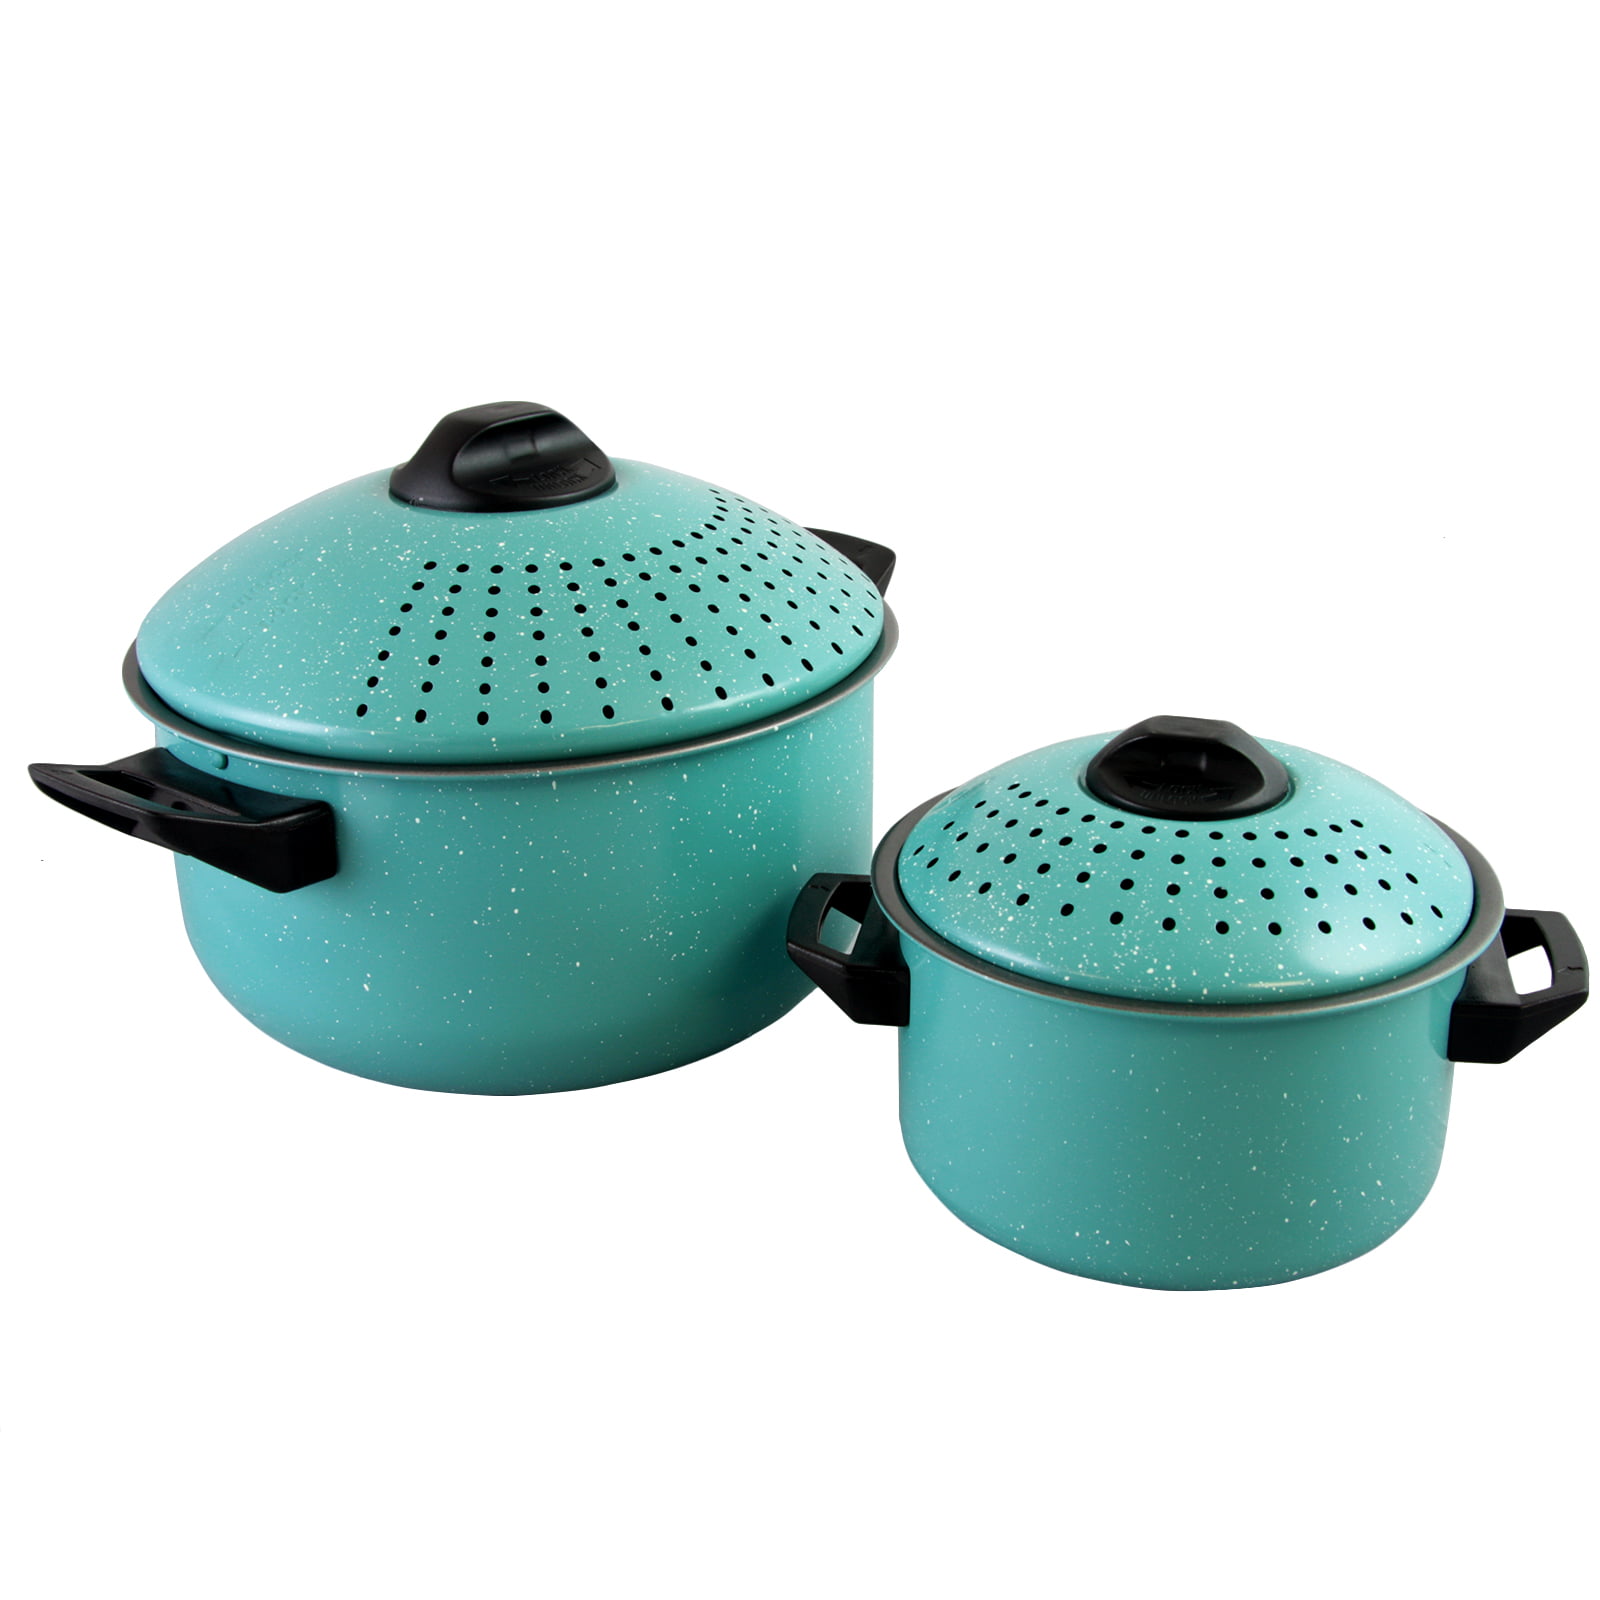 Turquoise Pasta pot with locking strainer lid by GIBSON nonstick interior 2 piece set